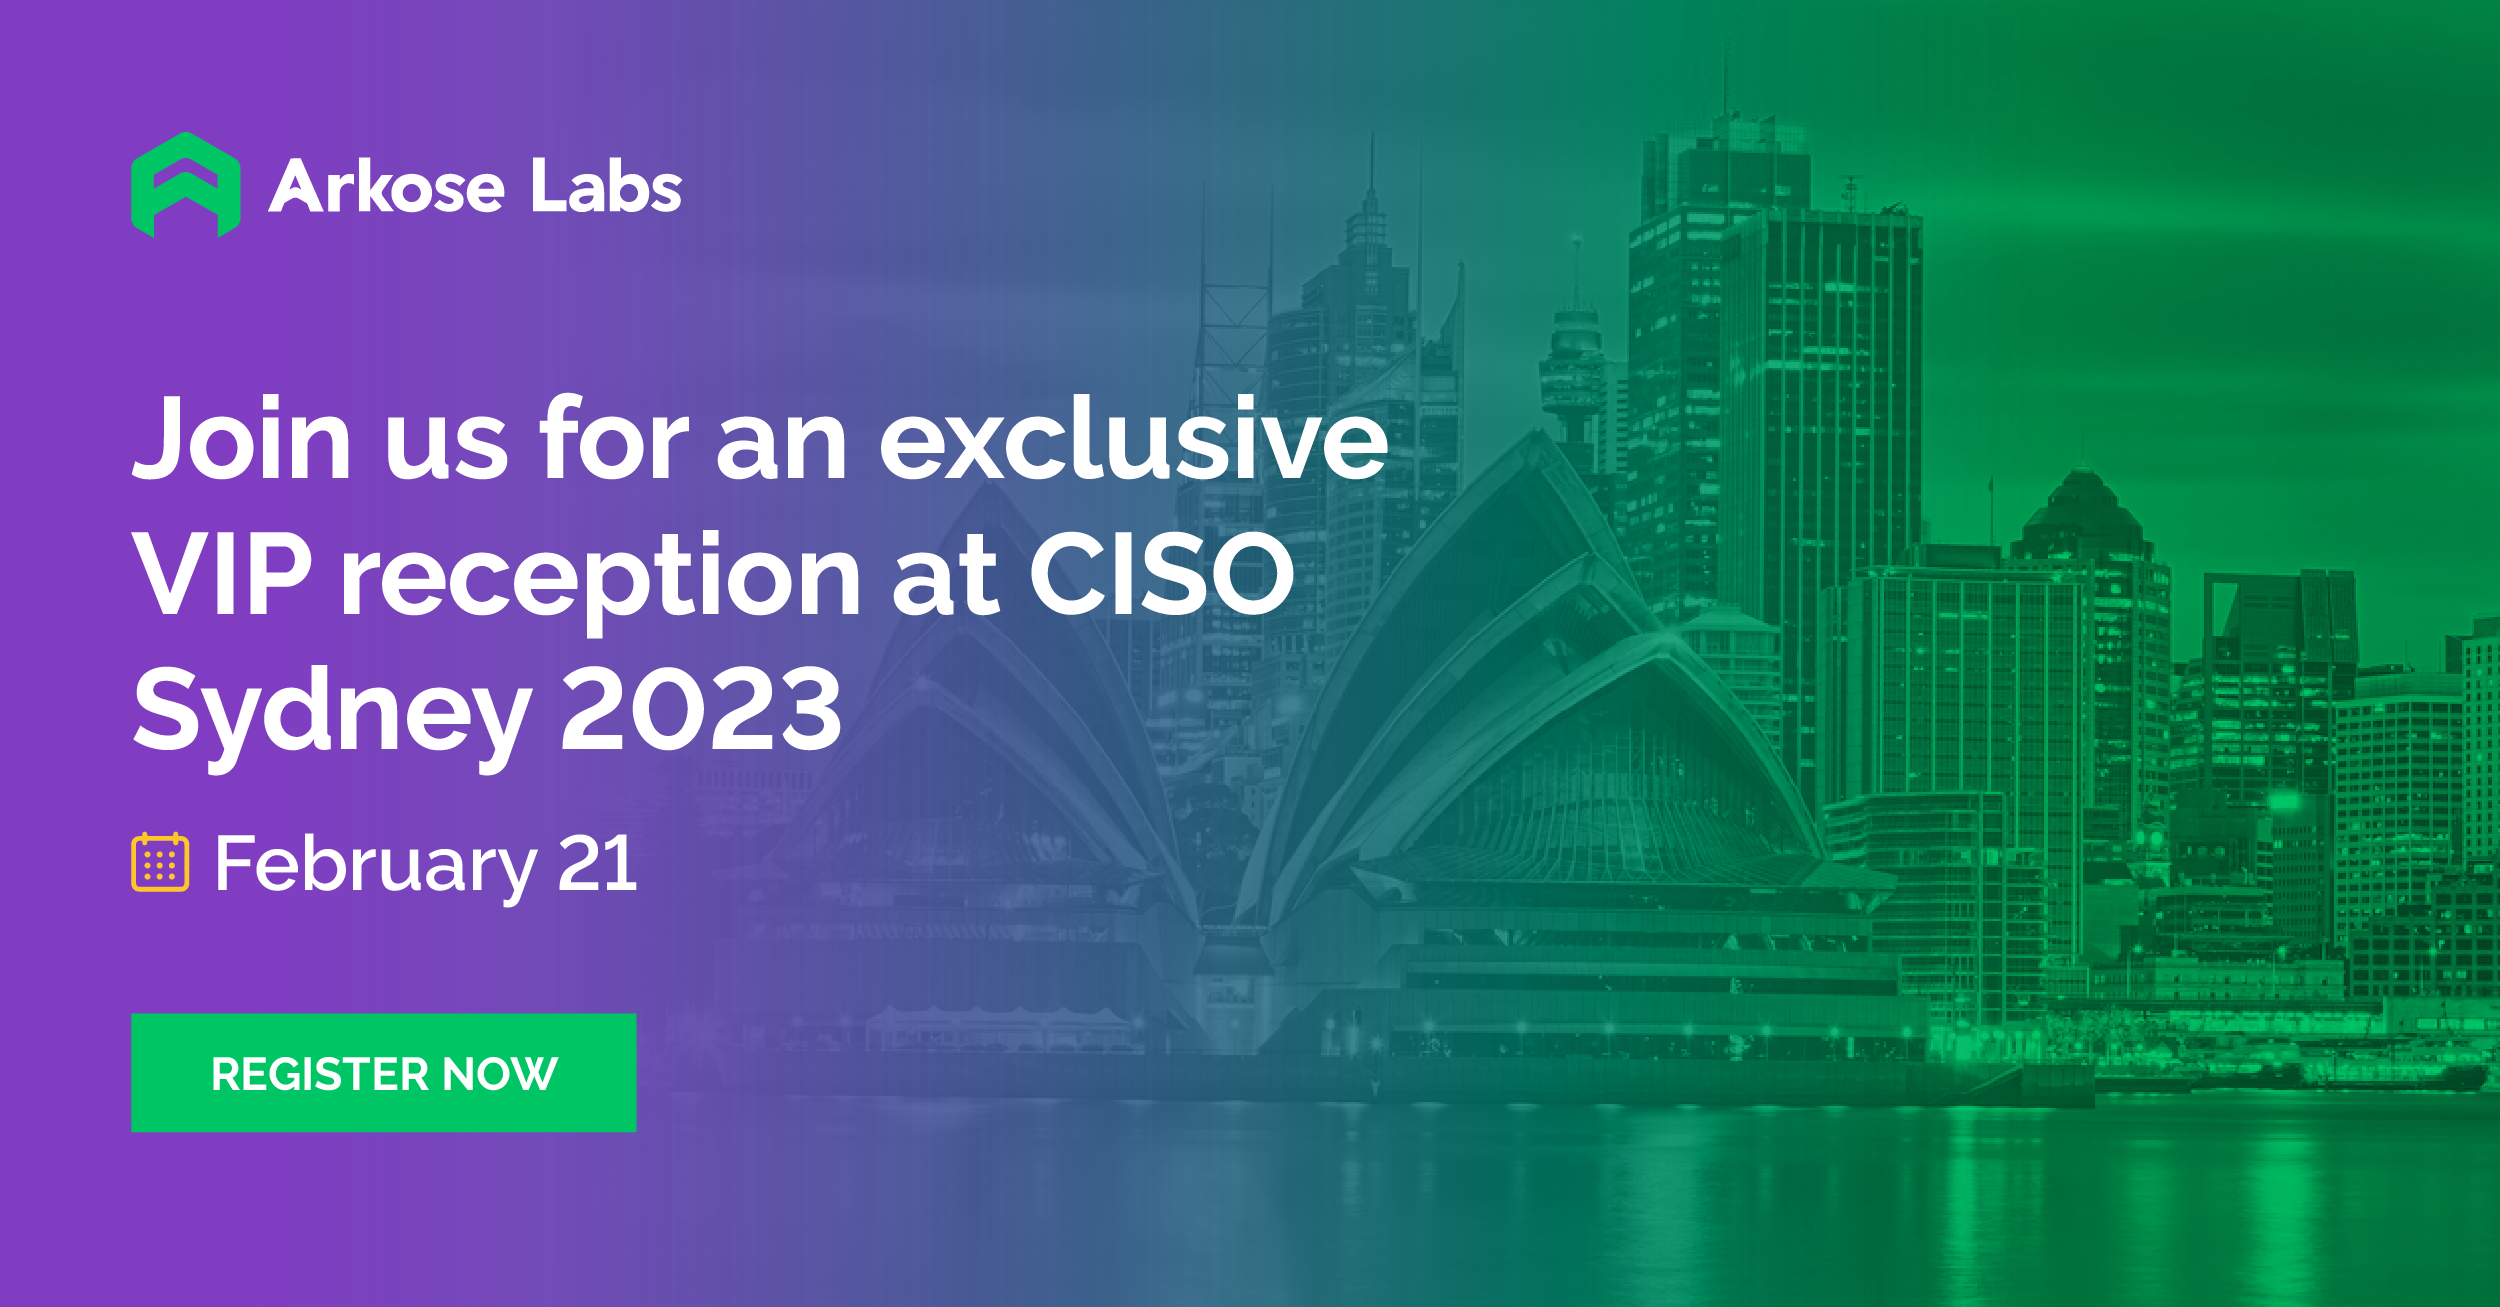 Join Our Exclusive VIP Reception at CISO Sydney 2023!